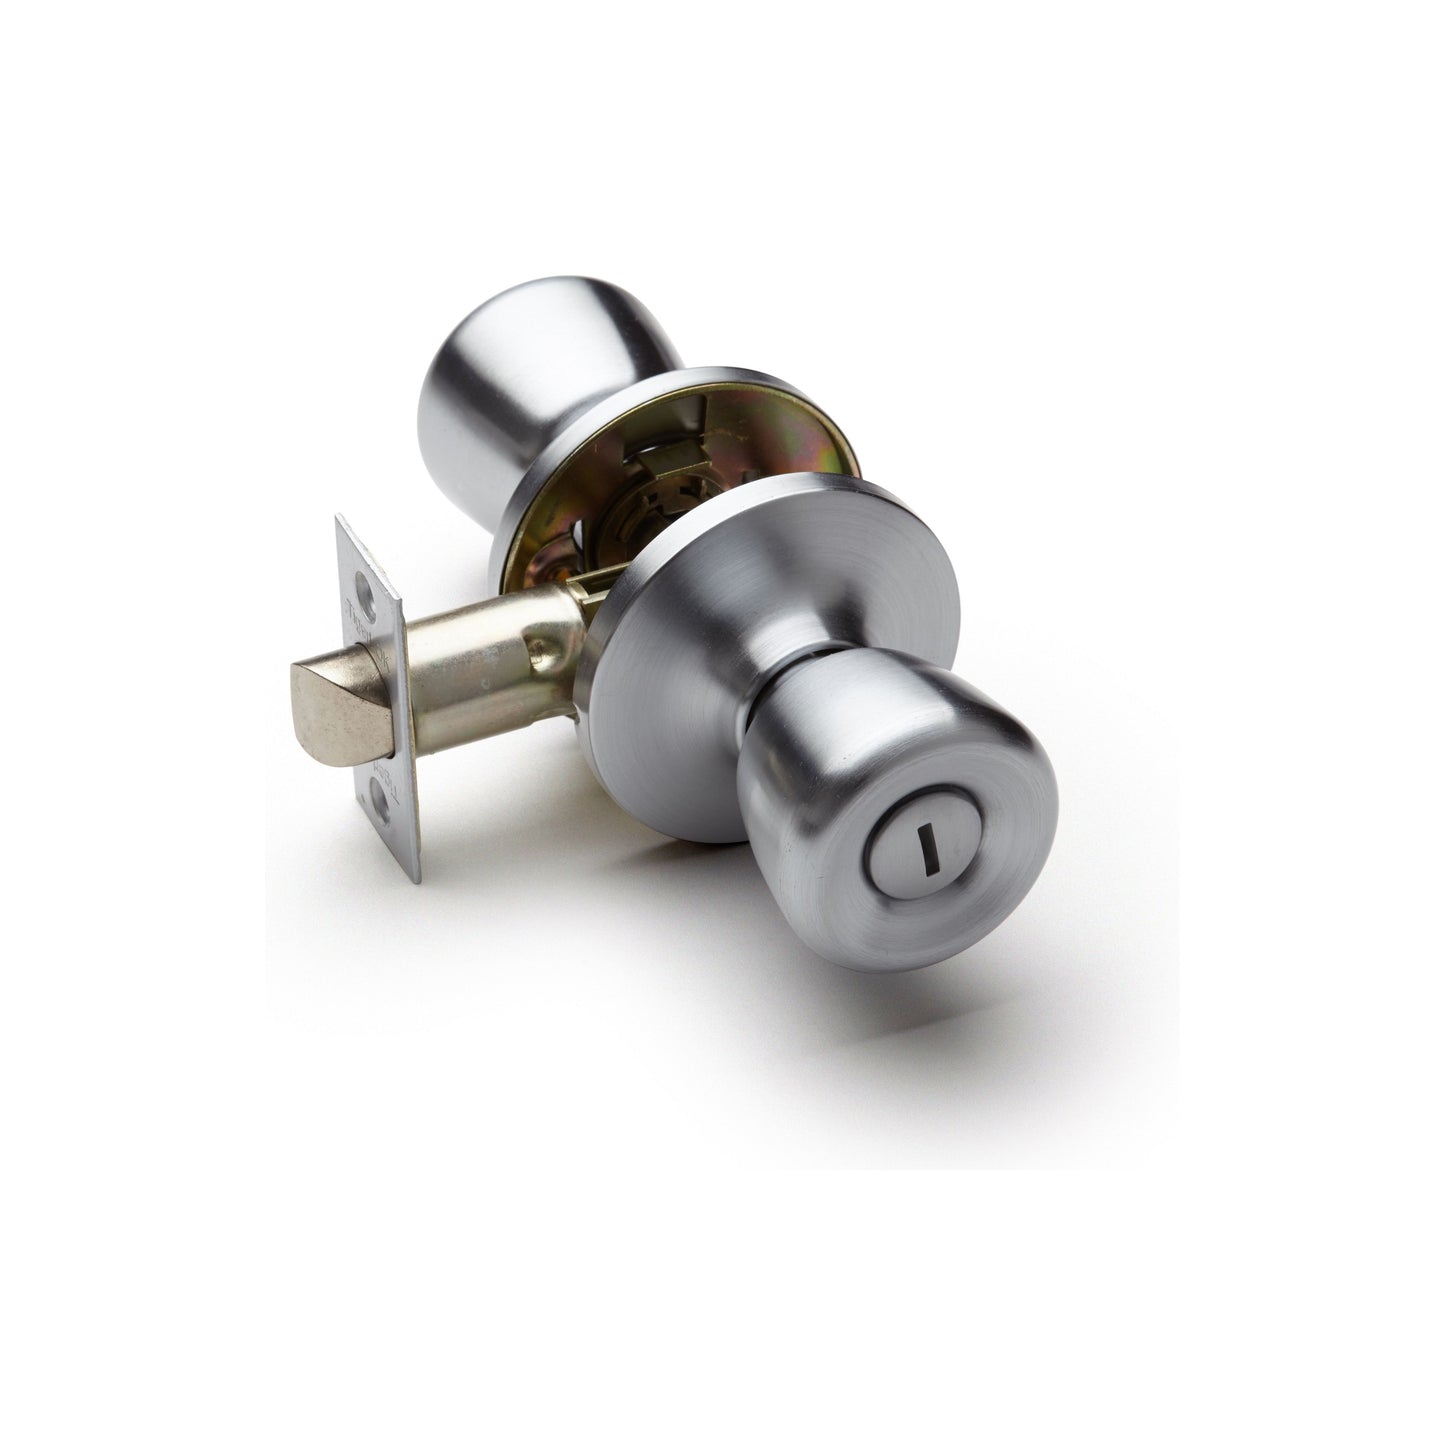 PRIVACY MAXIMUM SECURITY STAINLESS STEEL(US23D) LOCKSET